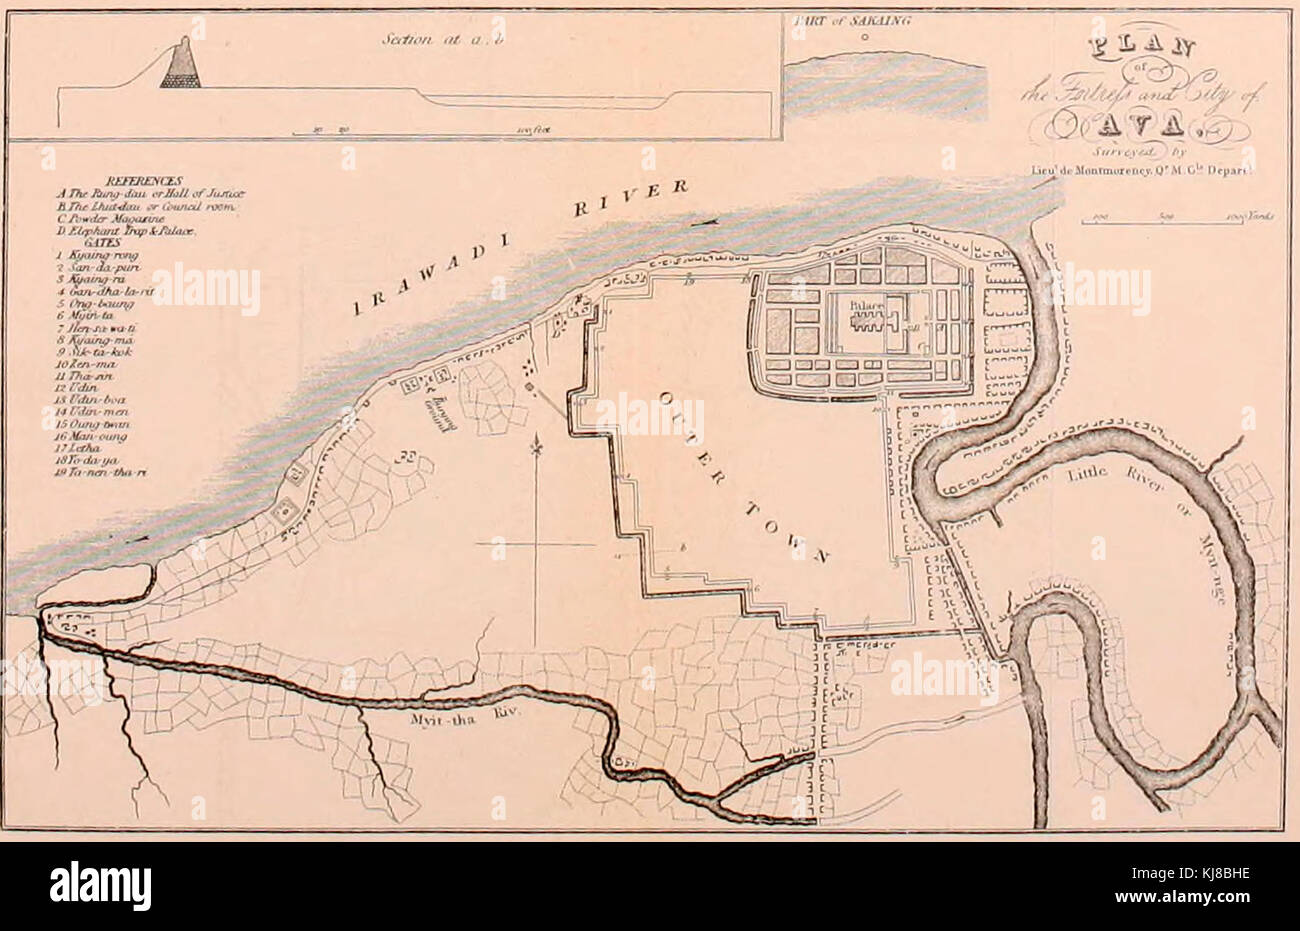 Plan of the Fortress and City of Ava, Burma, circa 1827 Stock Photo